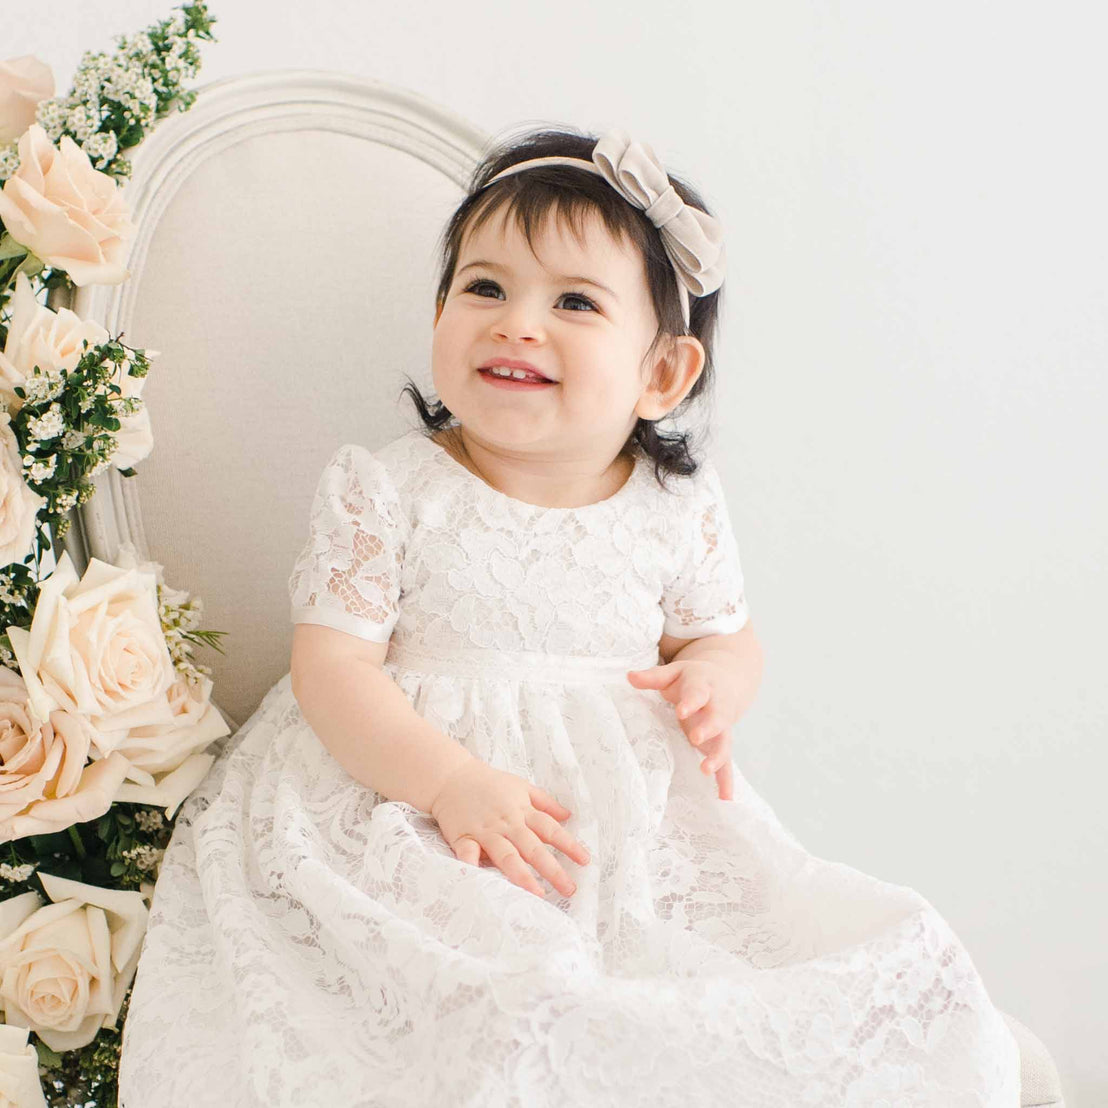 A cheerful toddler girl in a Rose Christening Gown & Bonnet, sitting in front of a vintage, floral-adorned chair, smiling joyfully in a light-filled room.